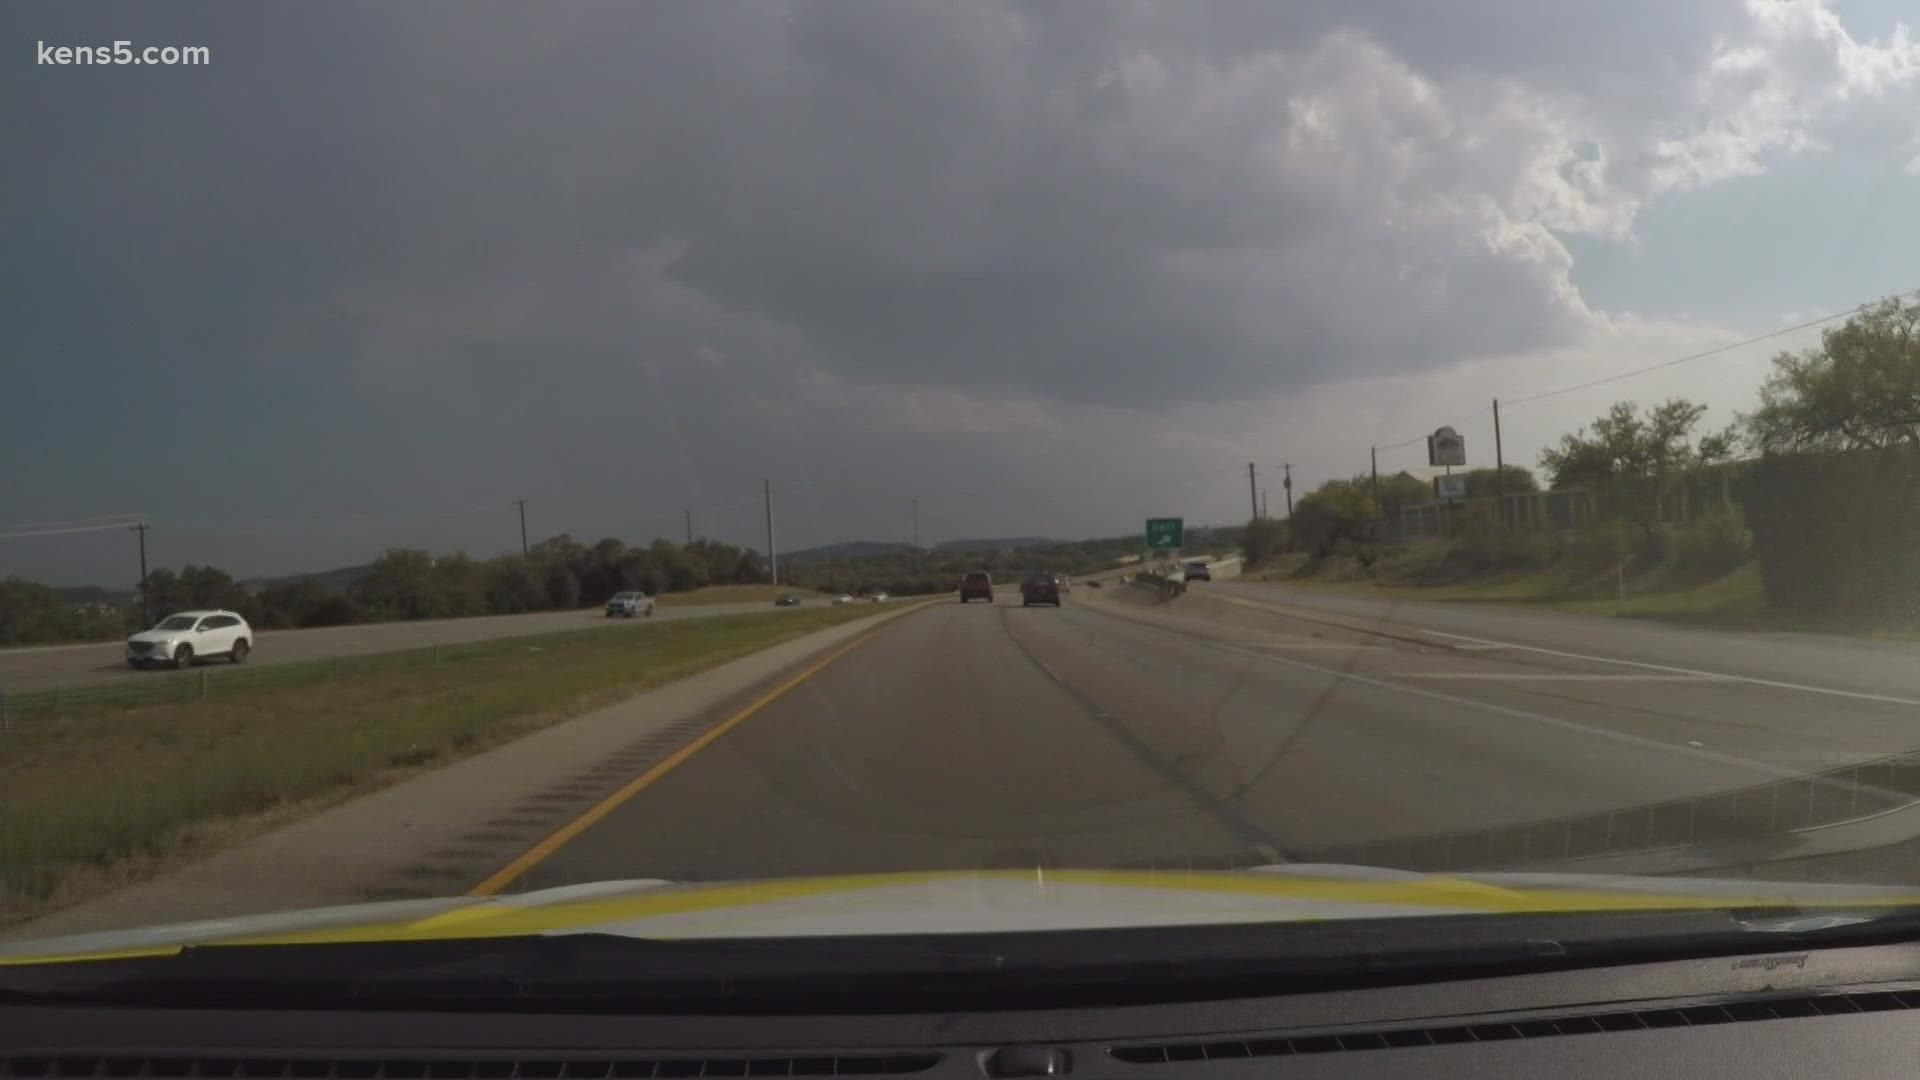 Video shows hail on the northwest side of San Antonio near 1604 and Northwest military